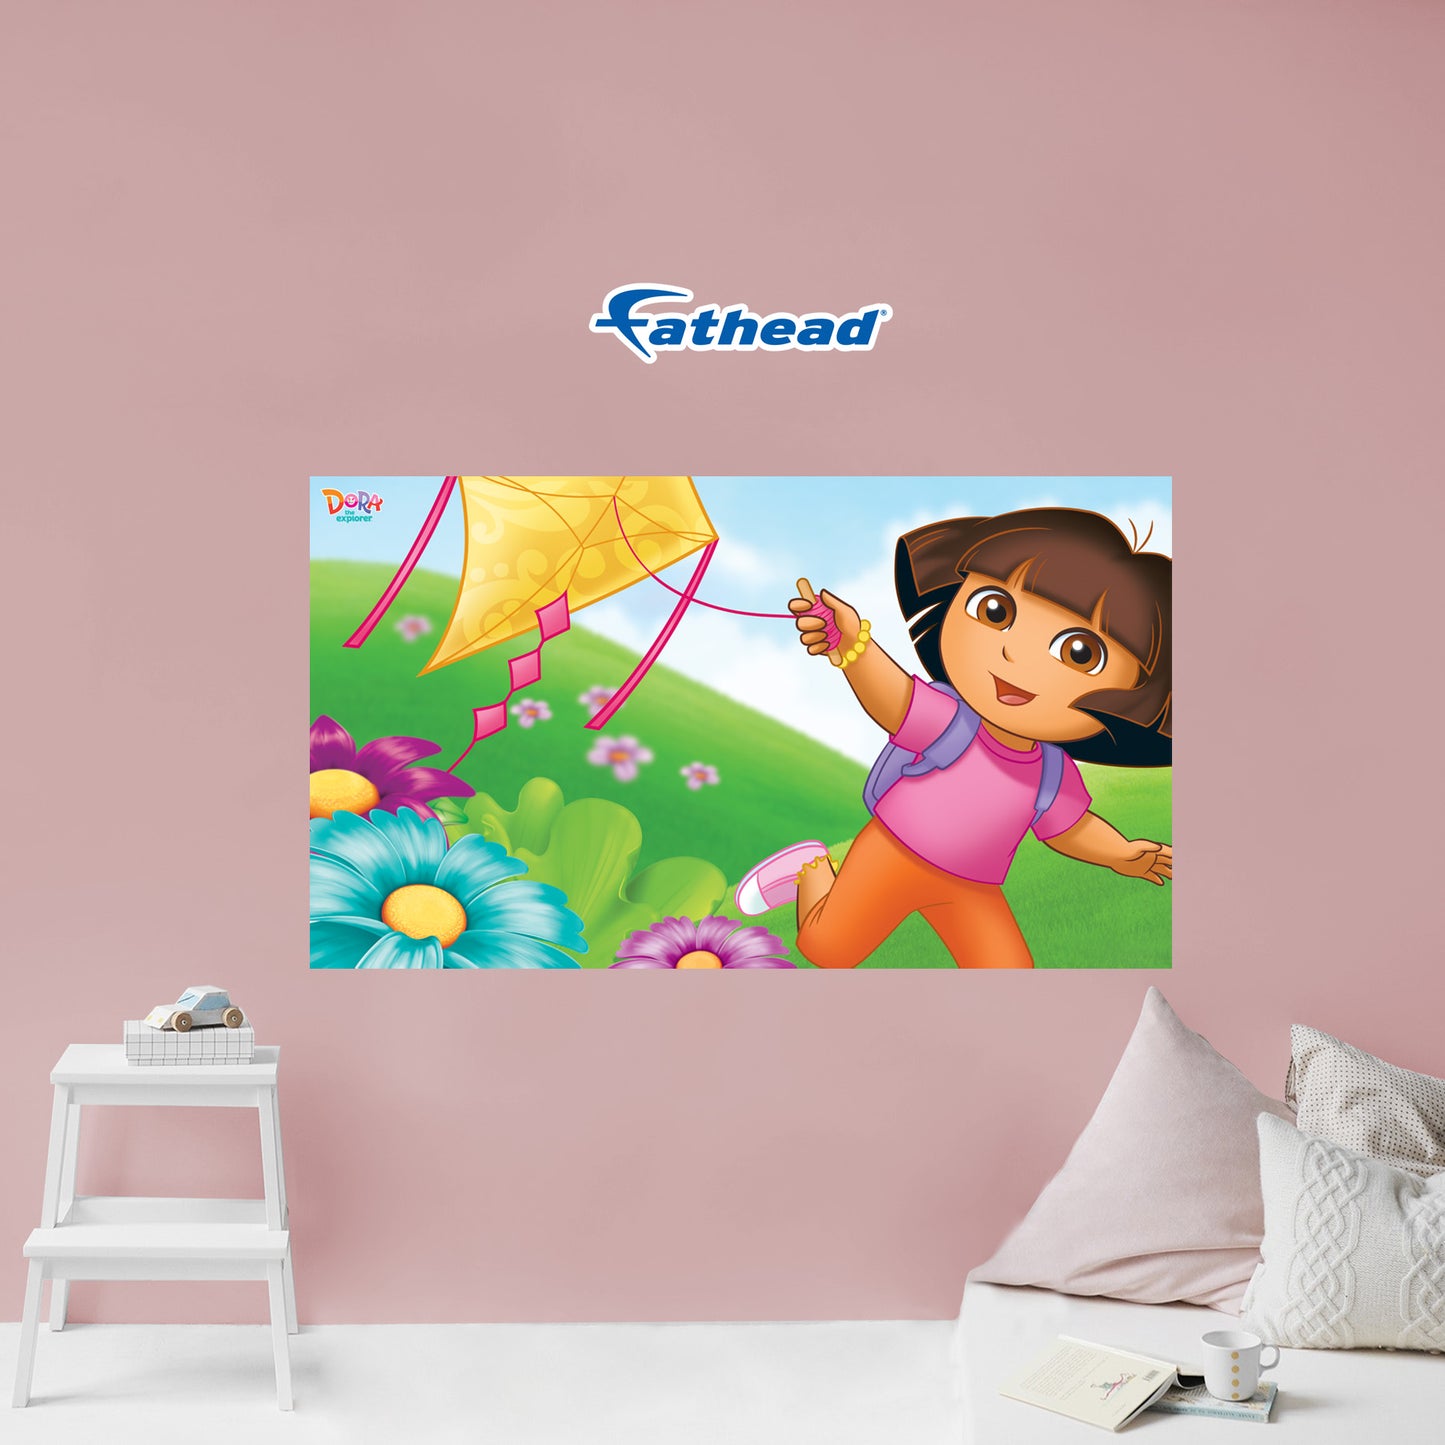 Dora the Explorer: Dora with Kite Poster - Officially Licensed Nickelodeon Removable Adhesive Decal